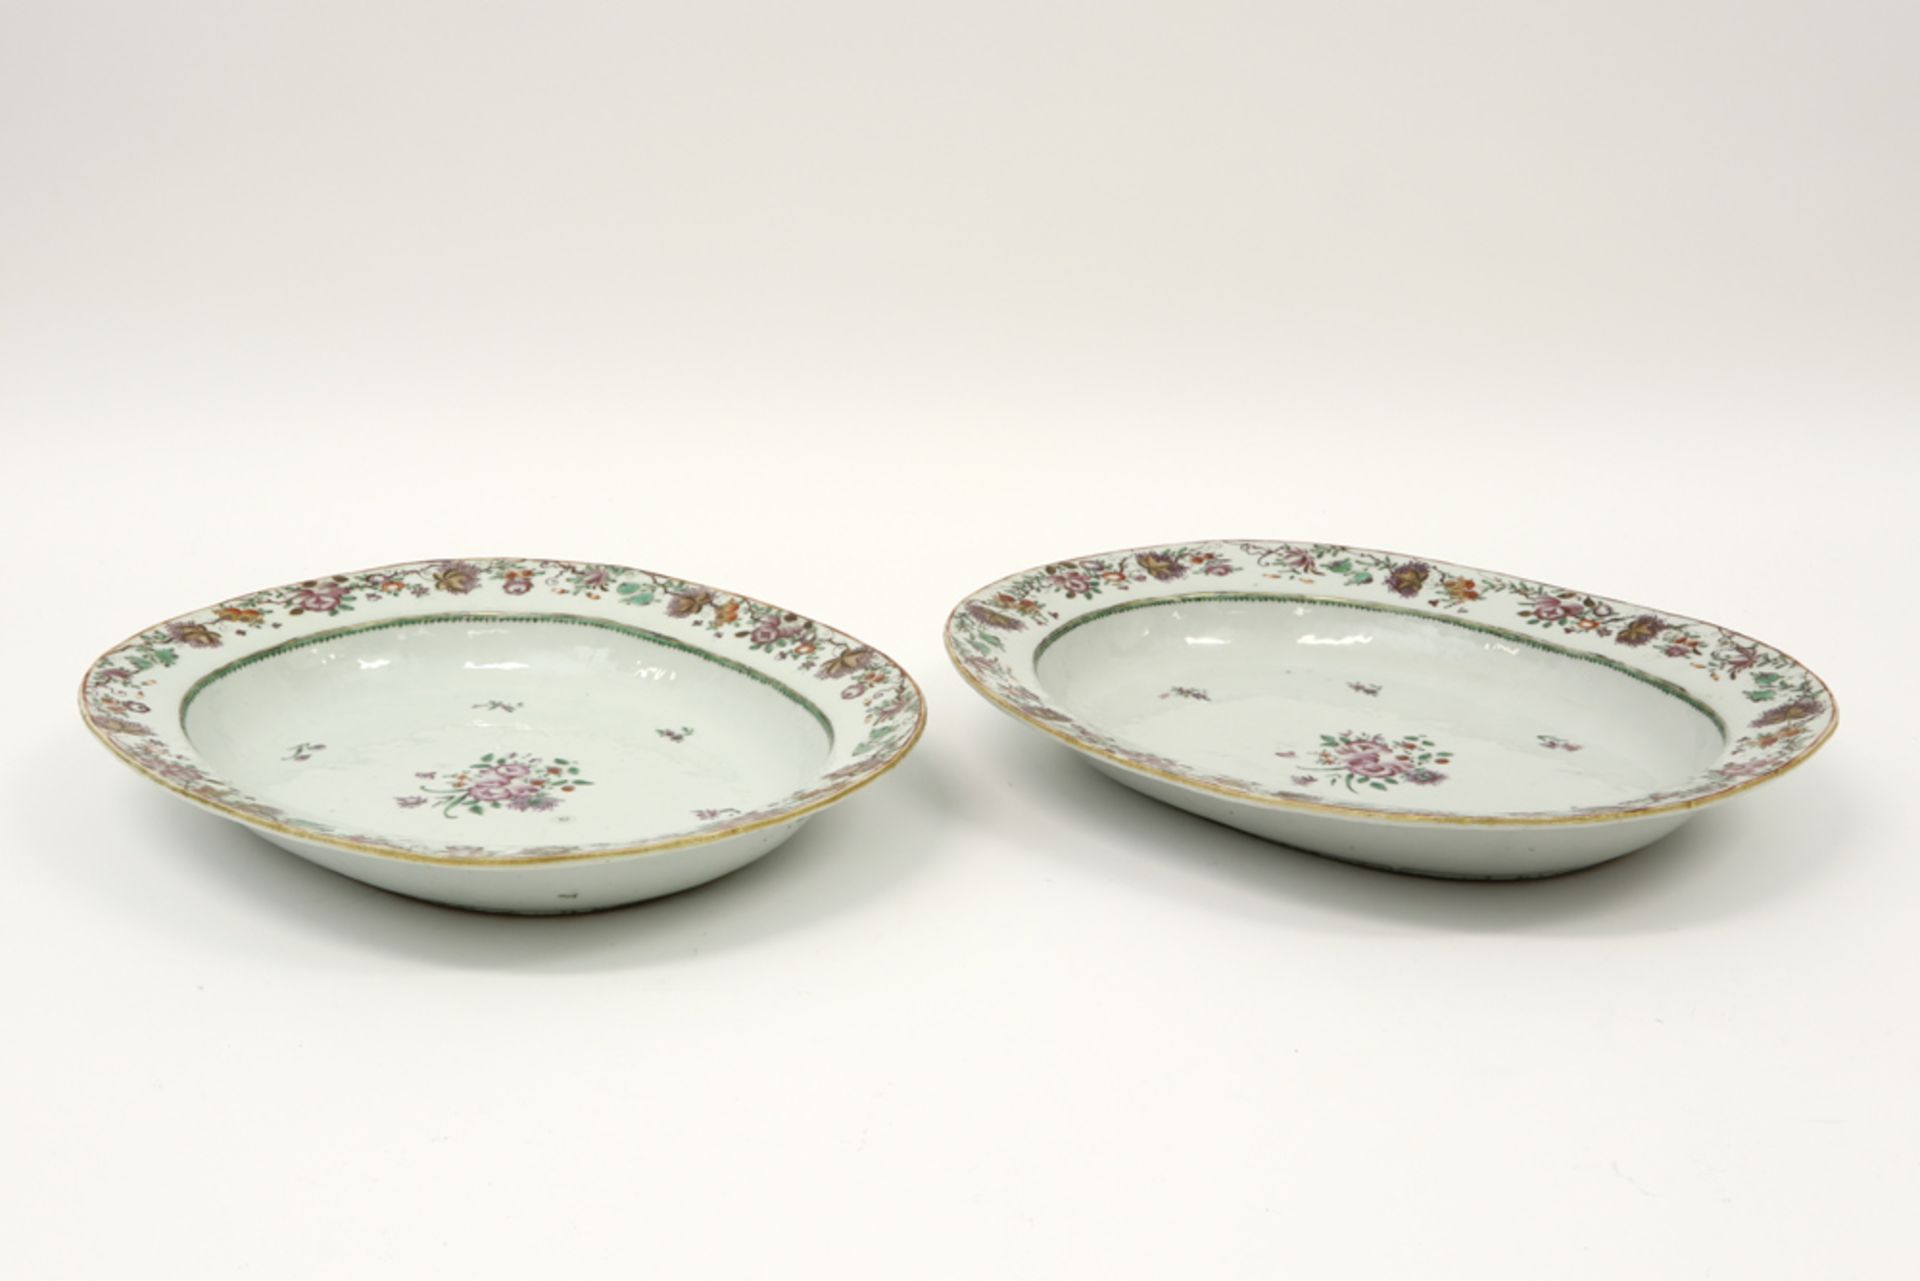 pair of quite big oval 18th Cent. Chinese (serving) dishes in porcelain with a floral Famille Rose - Image 3 of 3